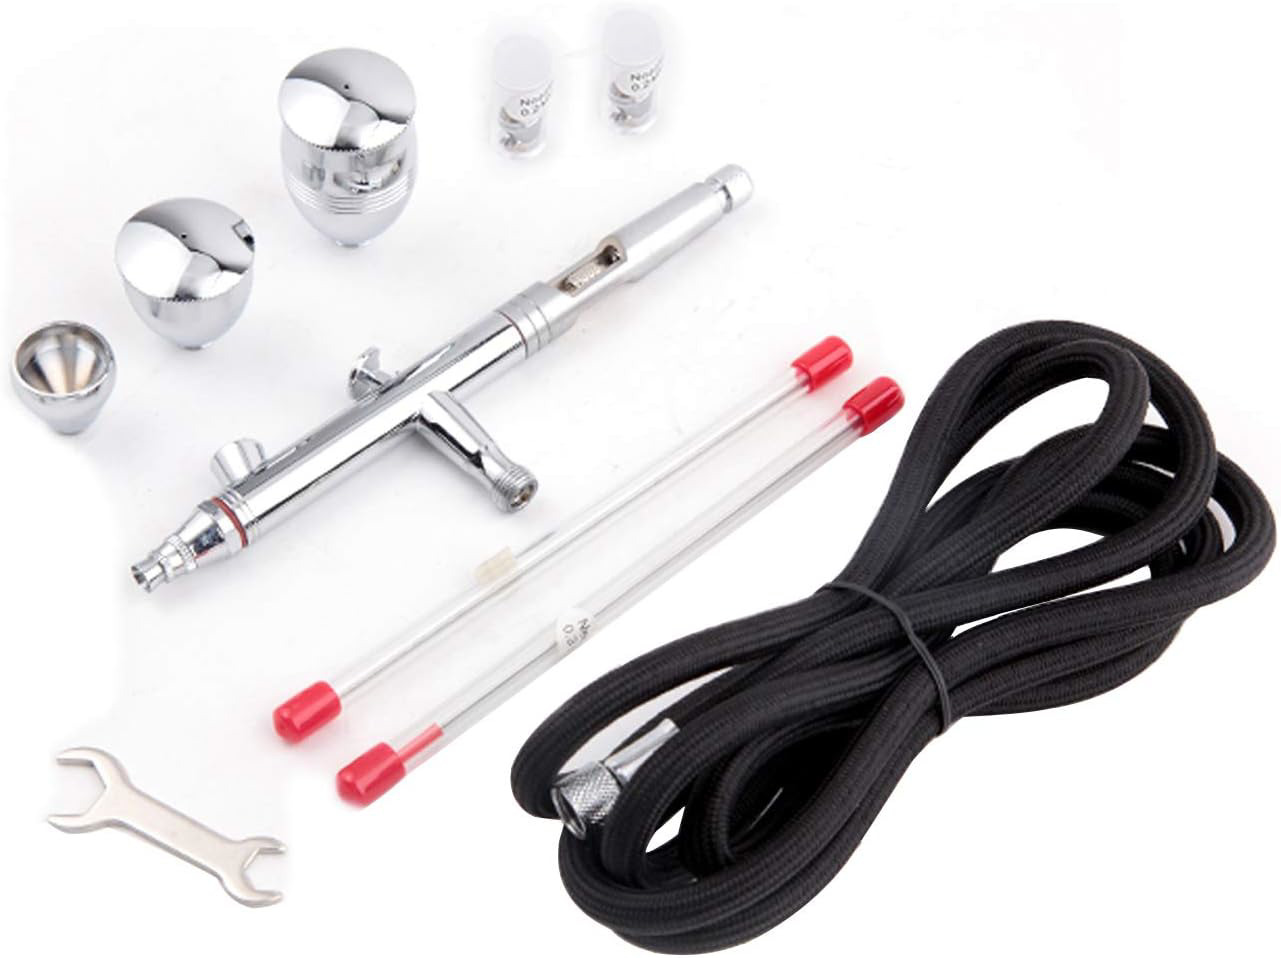 Fengda Airbrush FE-183K Precision Dual Action Airbrush Set for Gravity Feed with